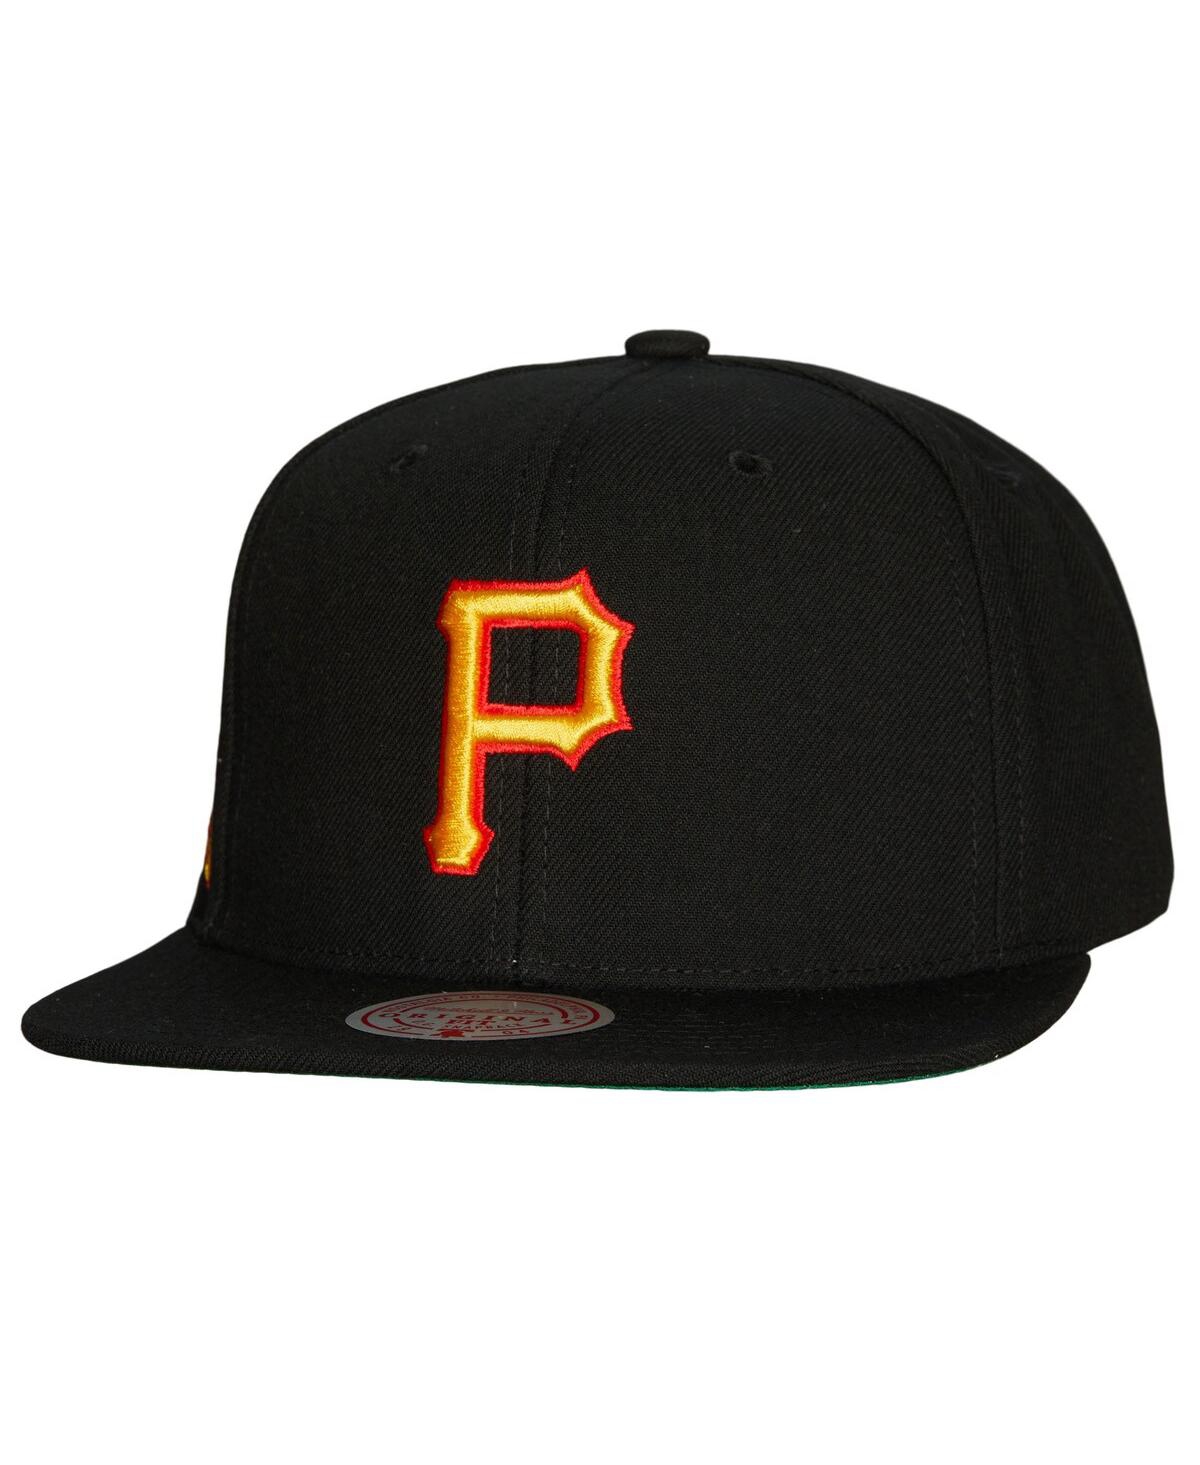 Mitchell & Ness Men's  Black Pittsburgh Pirates Cooperstown Collection Evergreen Snapback Hat